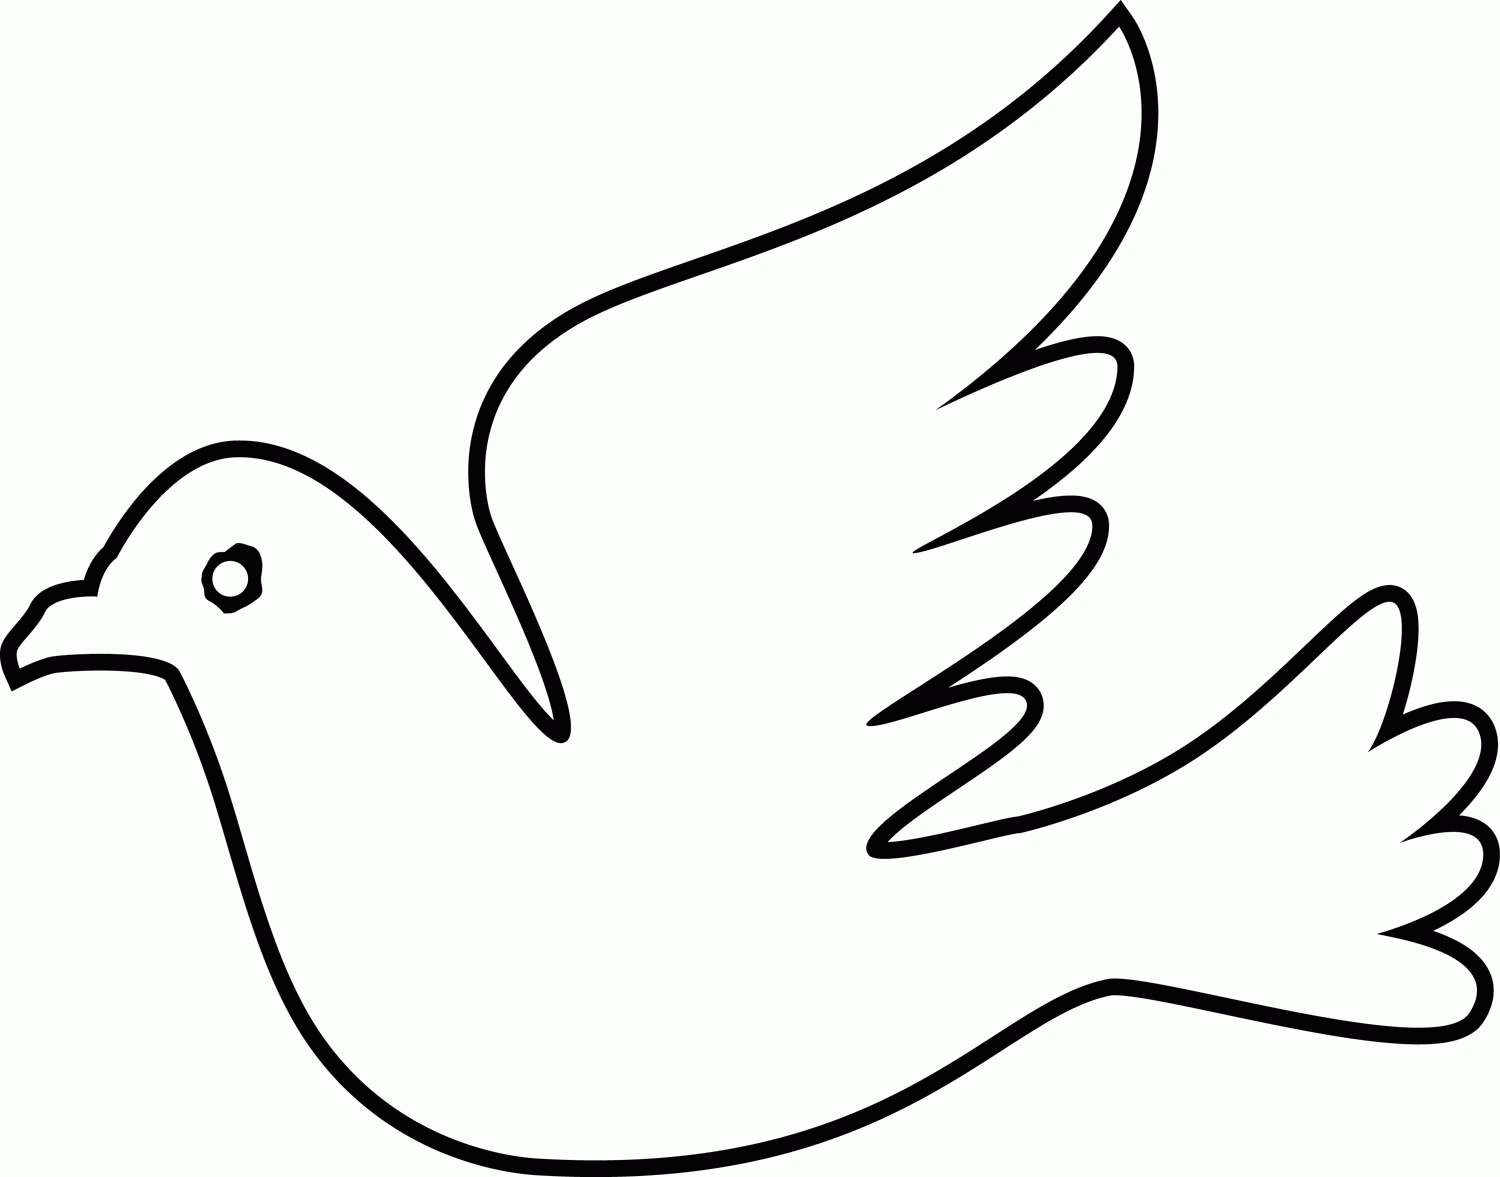 pictures of doves to color turtle doves coloring pages coloring home pictures to color doves of 